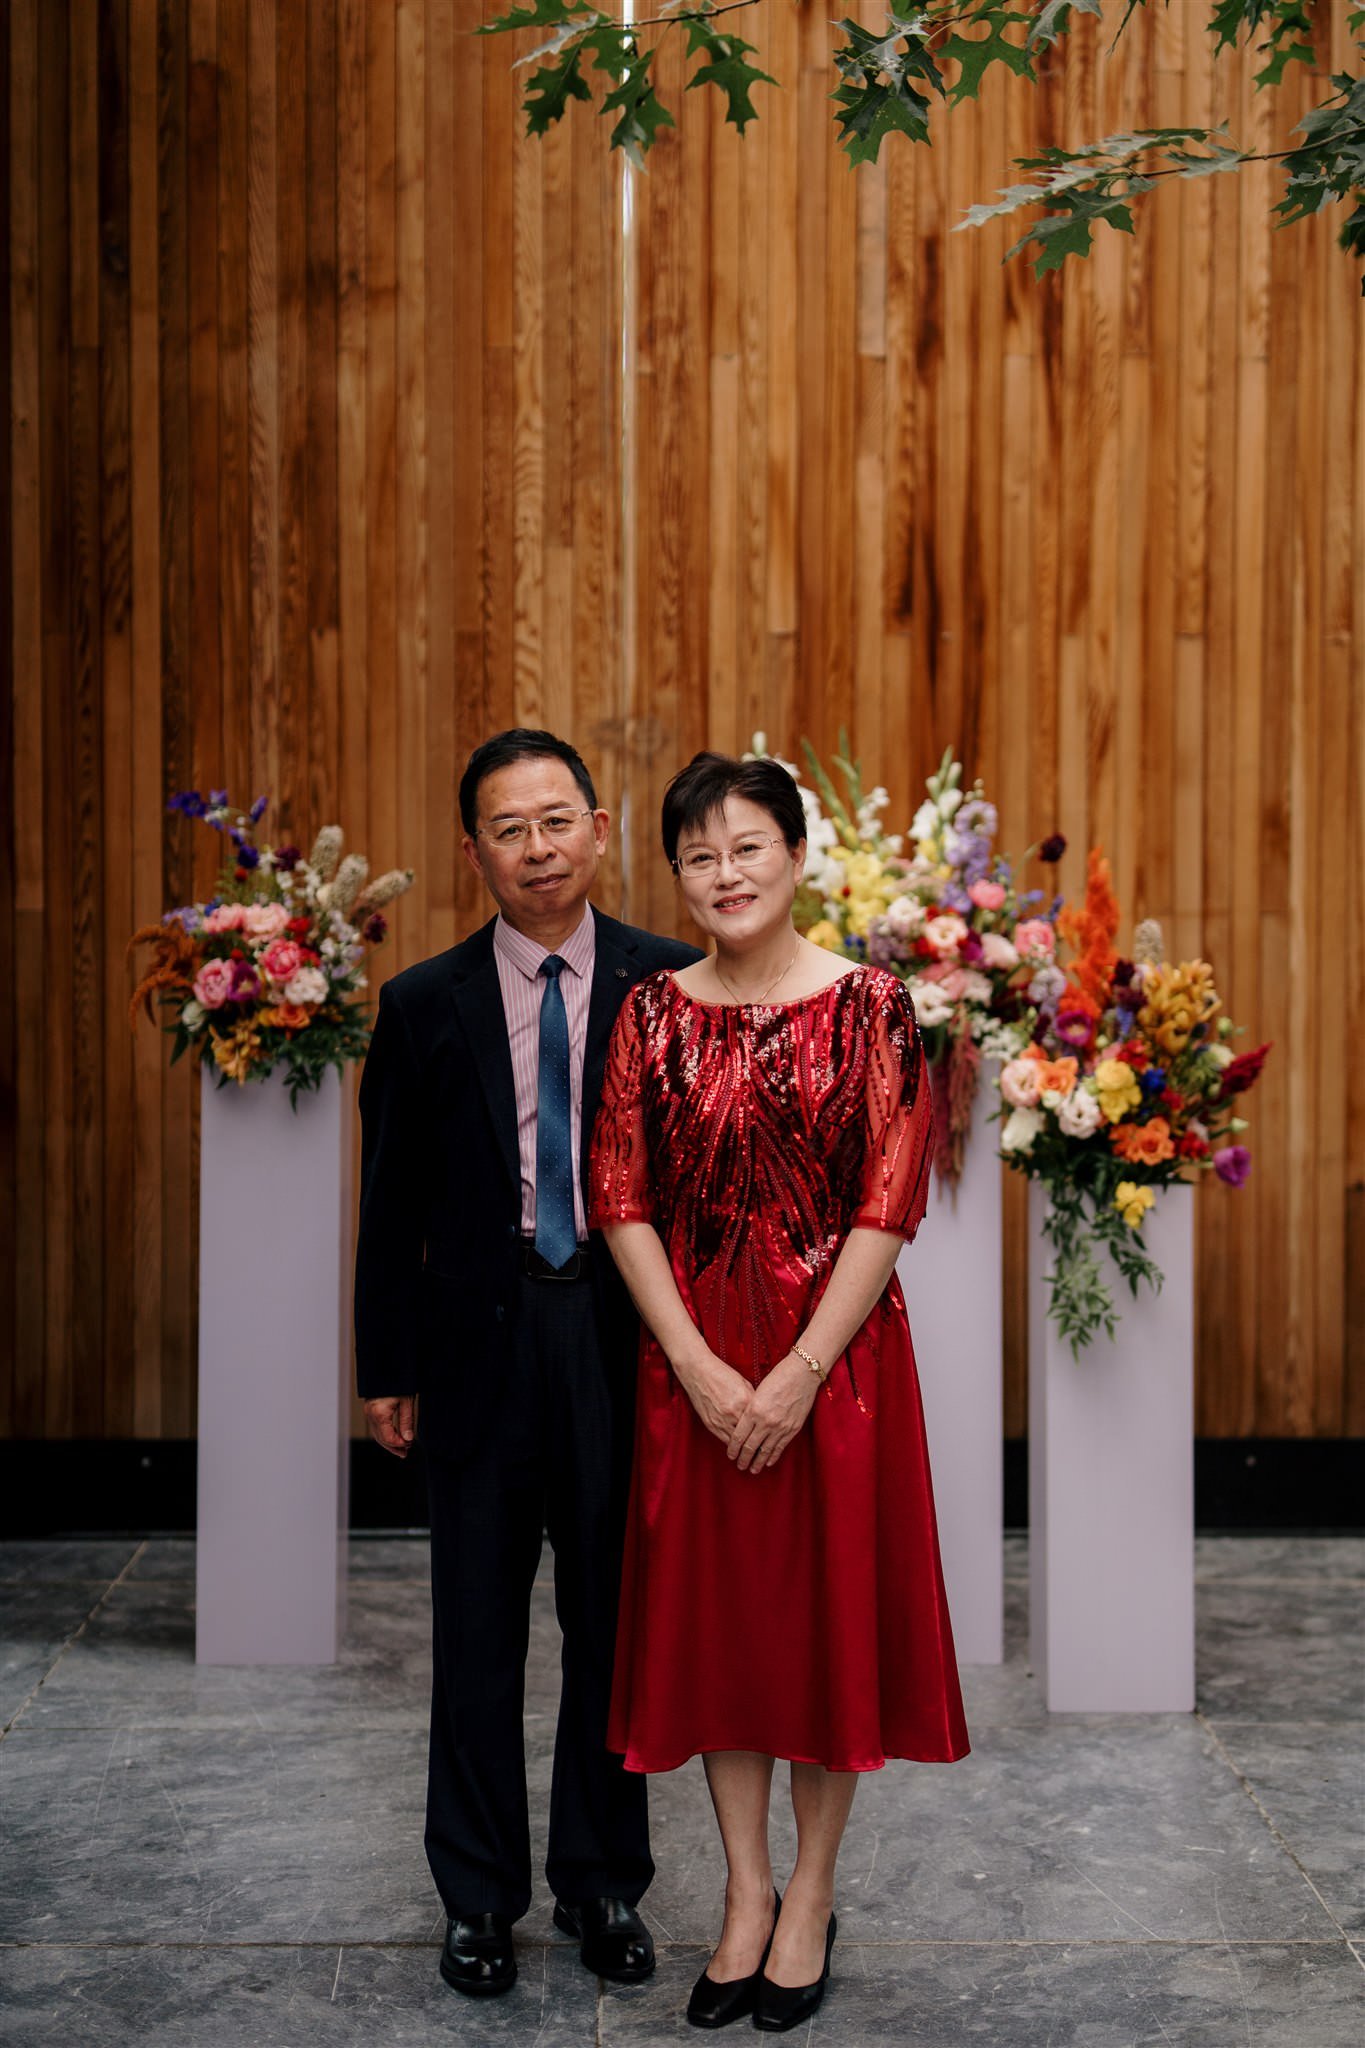 glasshouse-morningside-urban-best-auckland-wedding-venue-central-indoor-photographer-videographer-dear-white-productions-top-industrial-chinese-ceremony-tradition (51).jpg